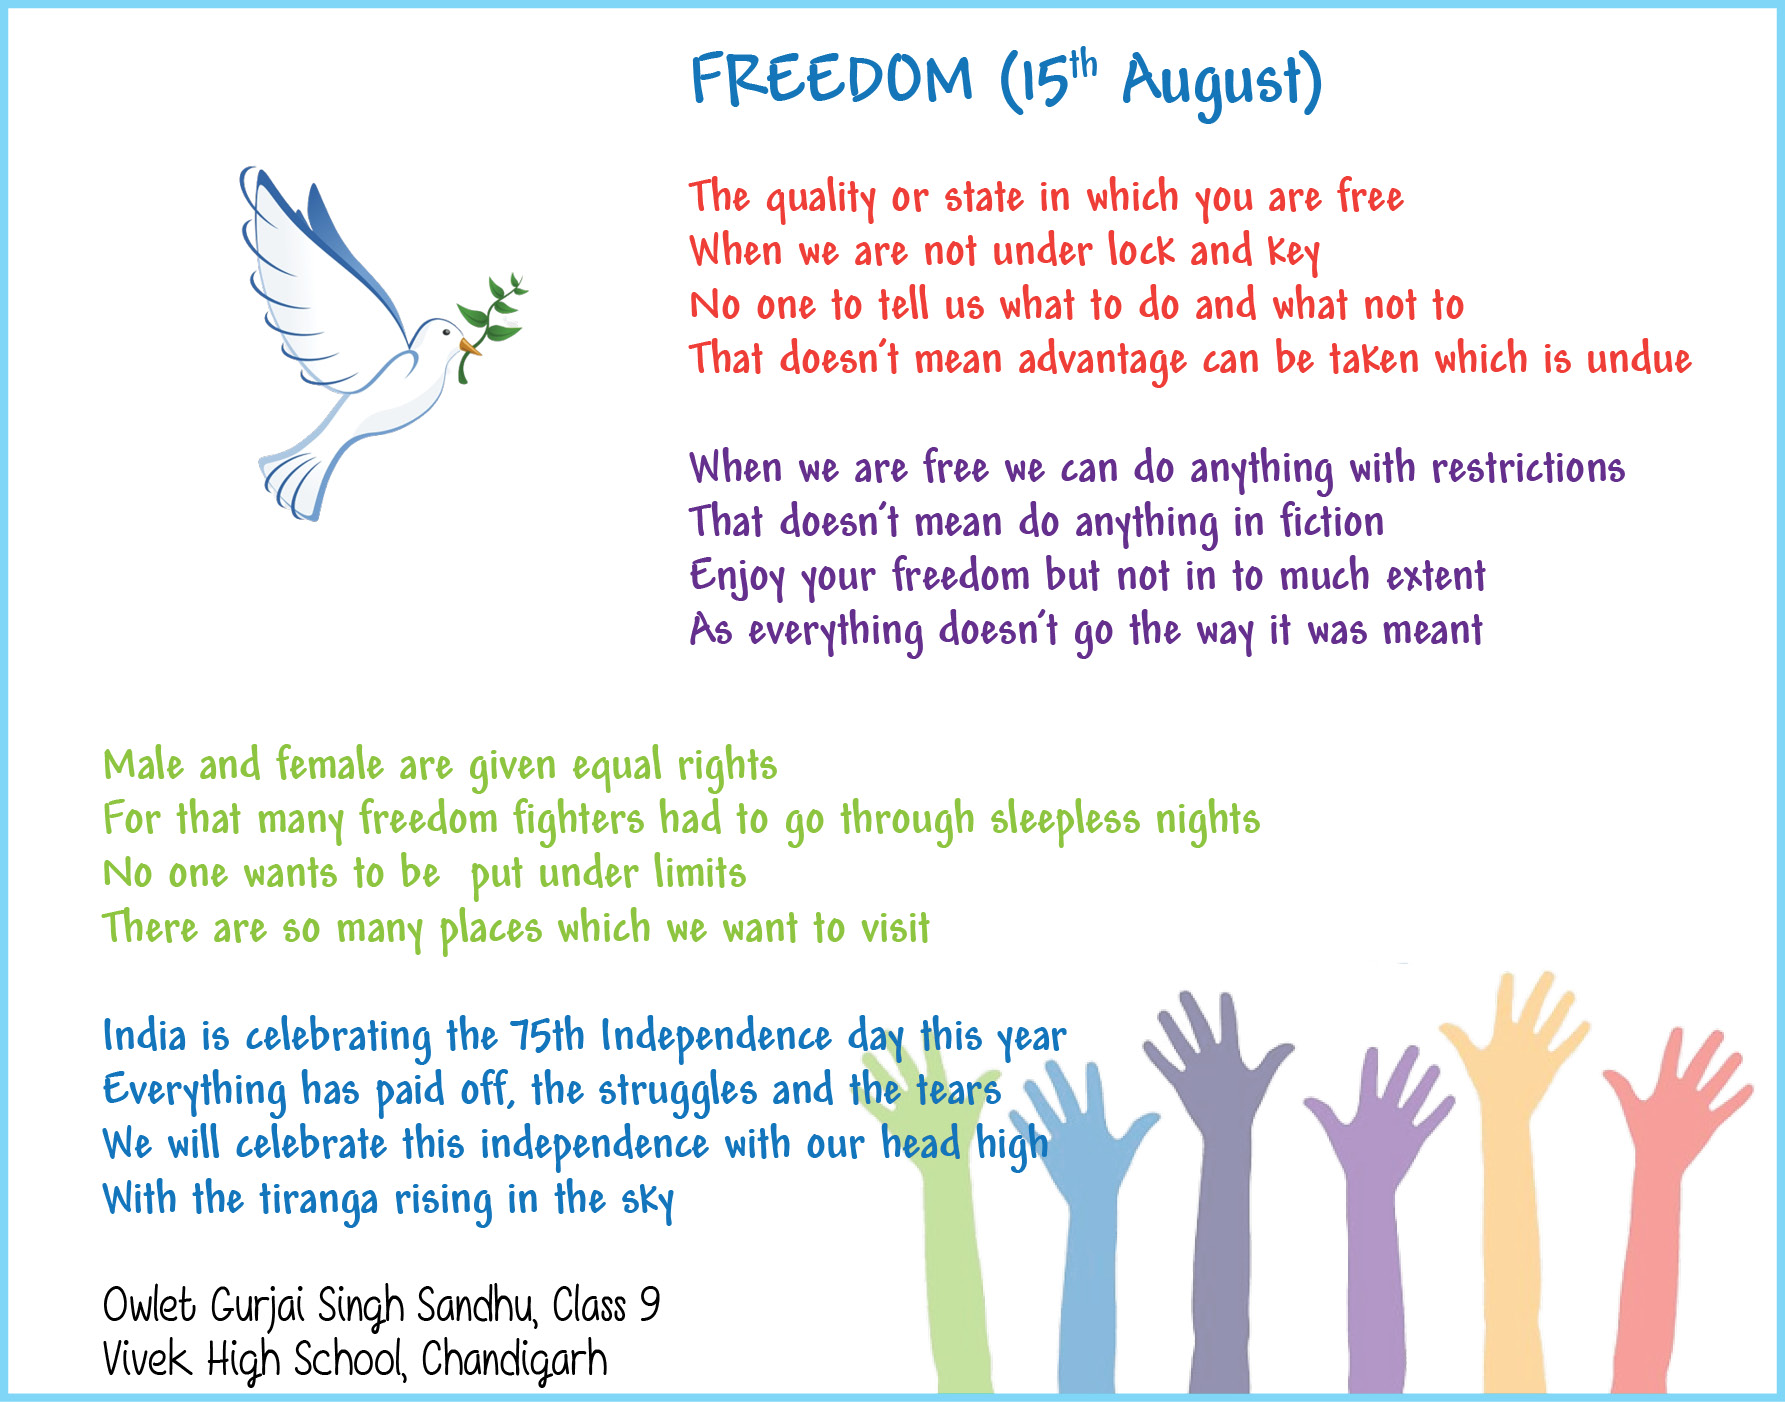 FREEDOM (15th August)